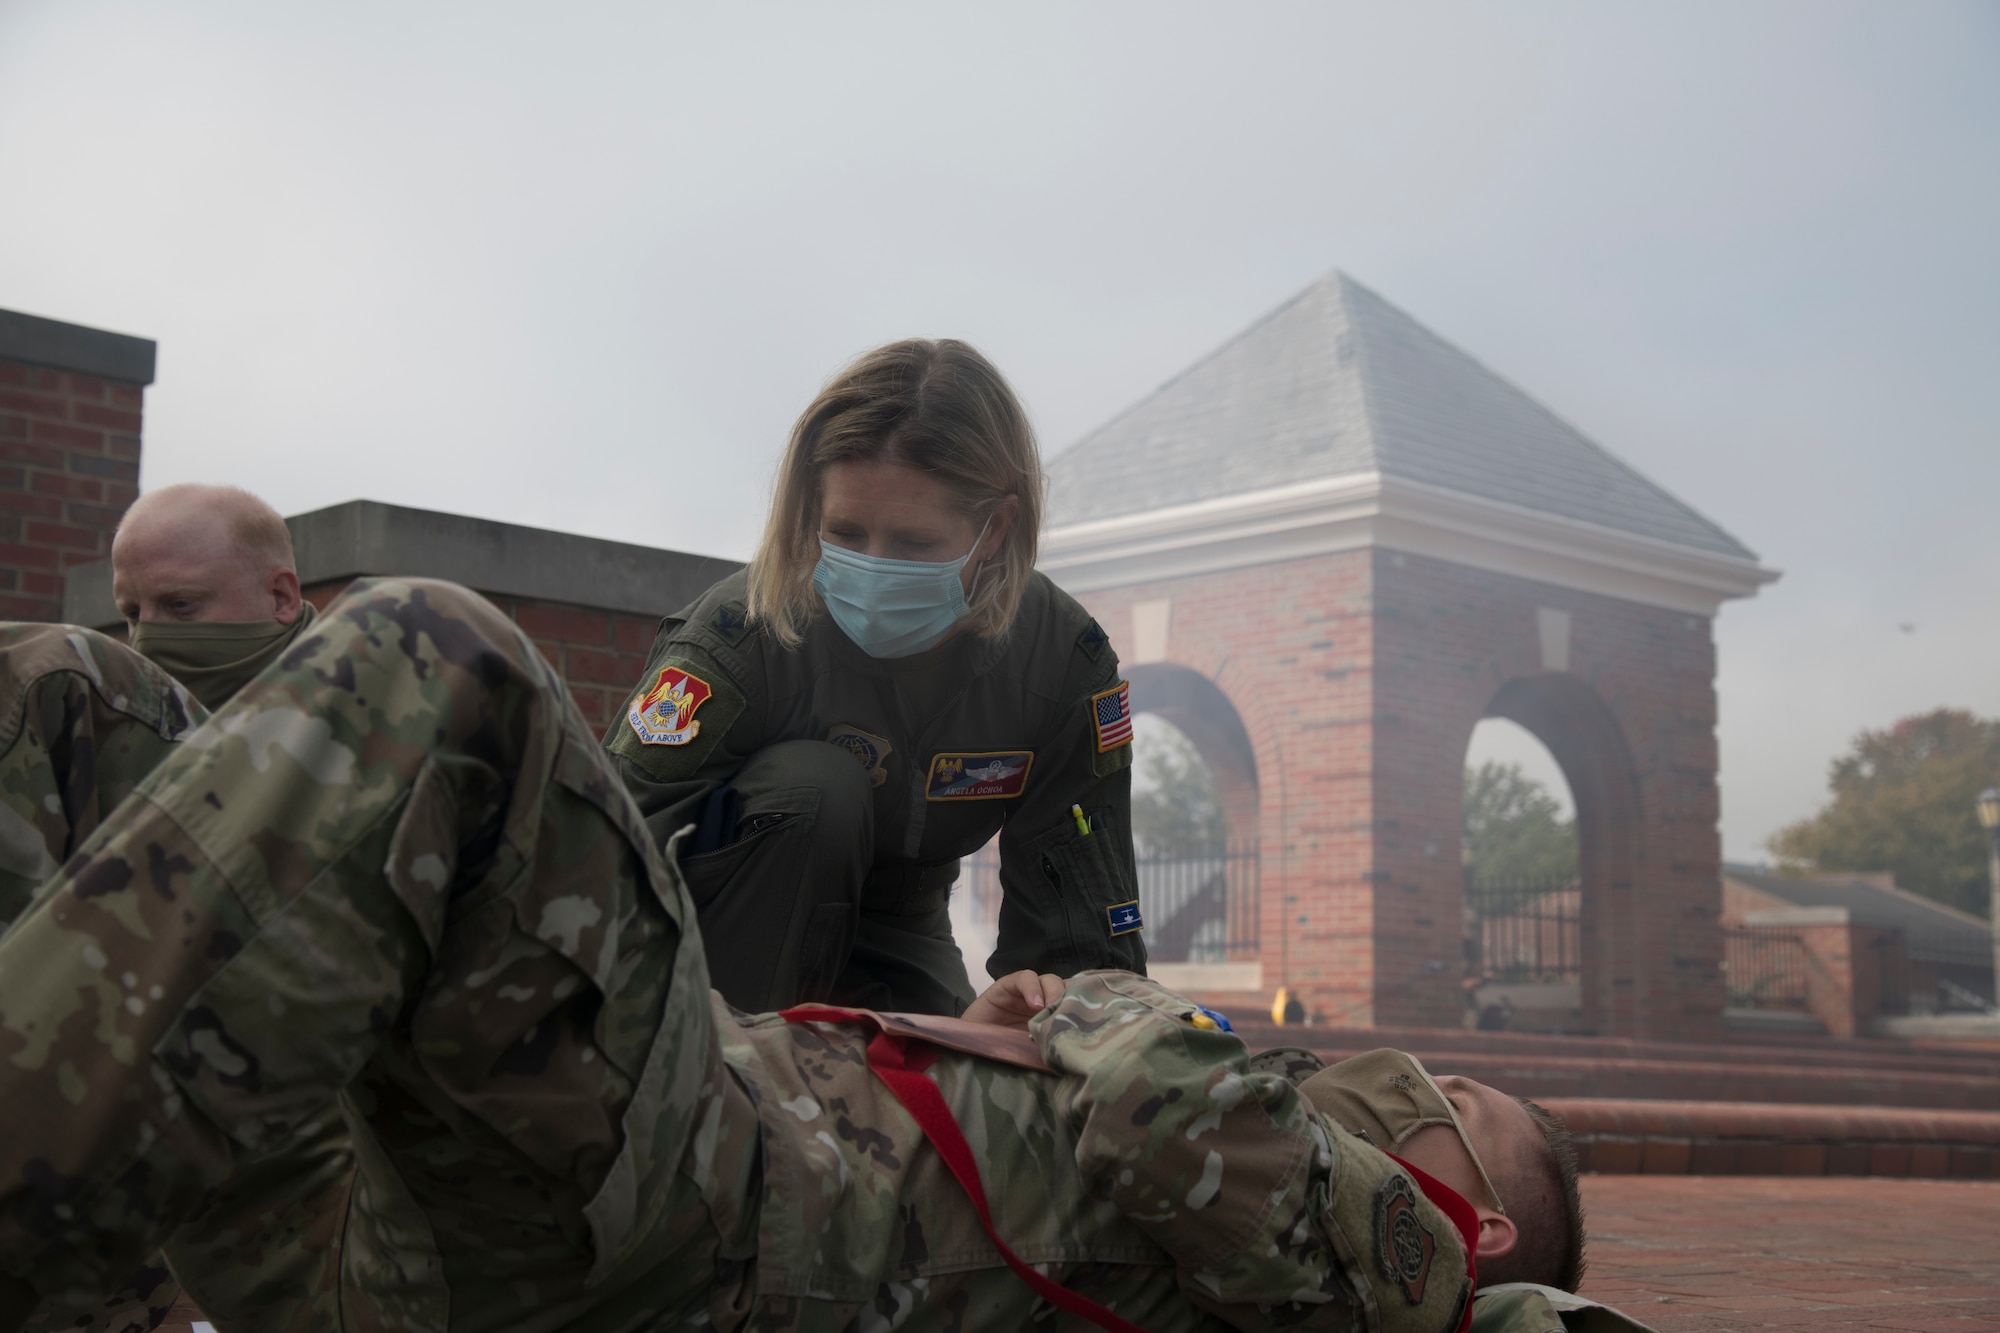 U.S. Air Force officer administers Self-Aid and Buddy Care